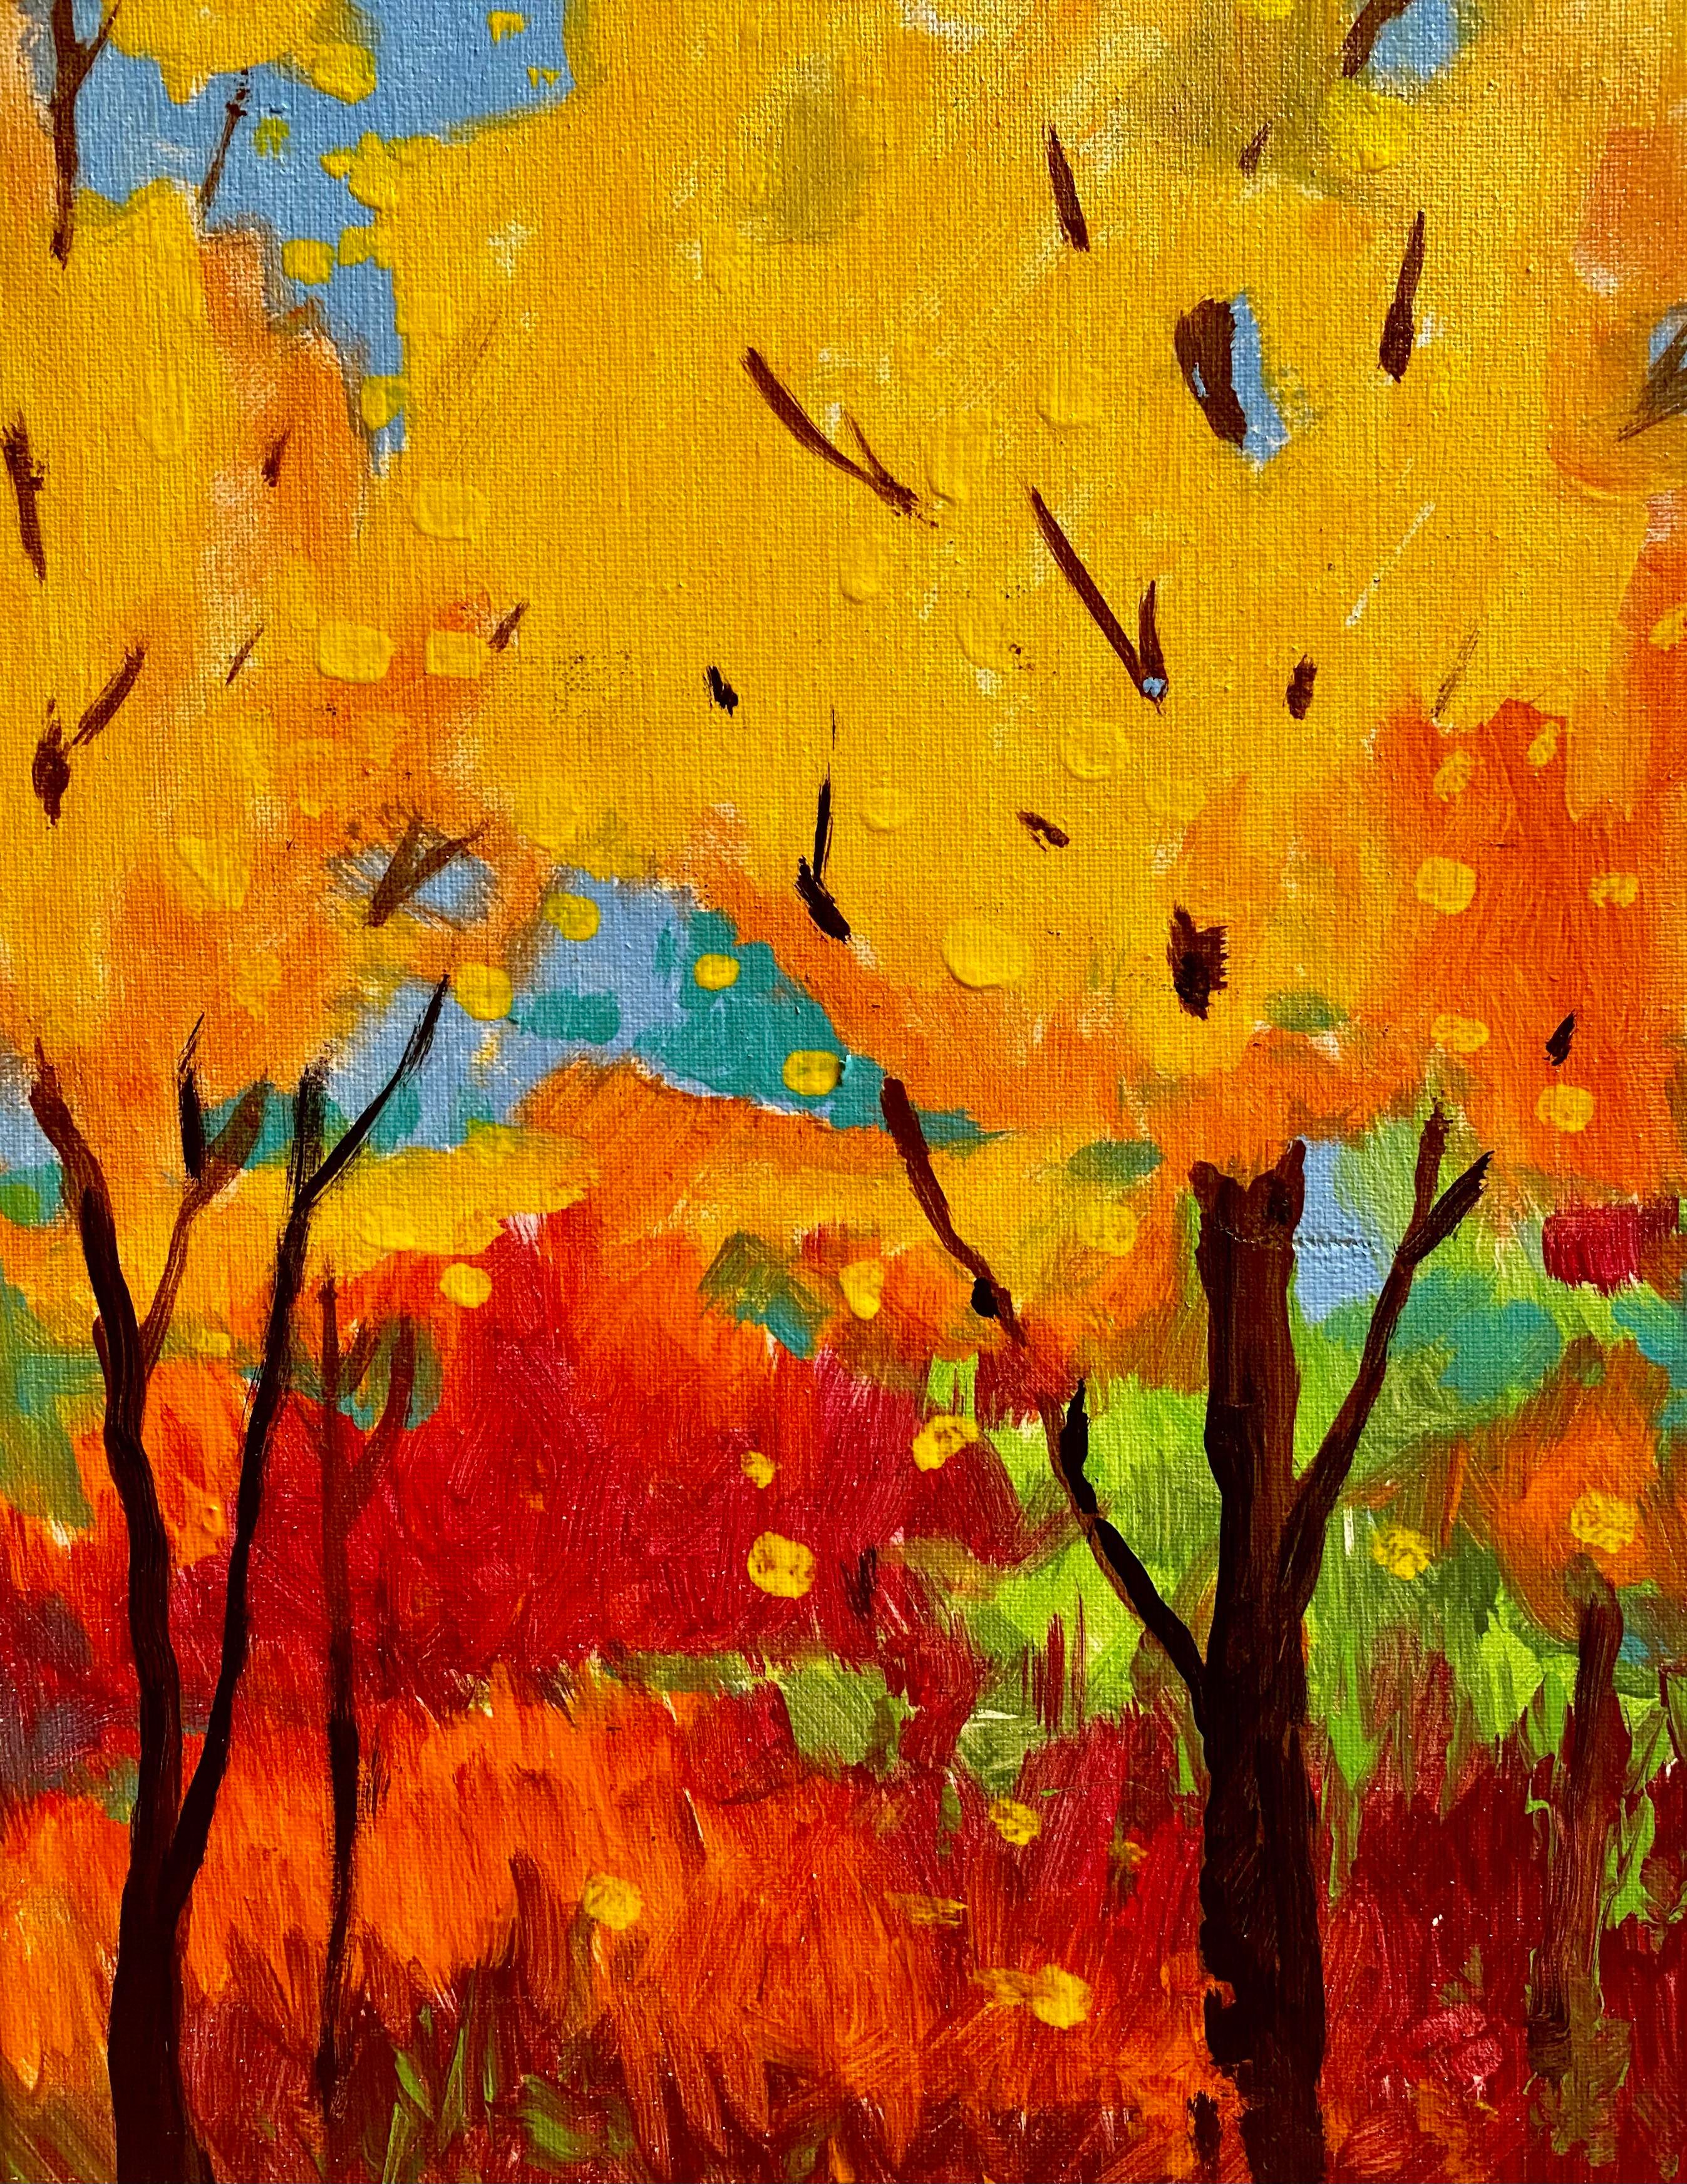 A Bright Autumn Trees experience project by Yaymaker